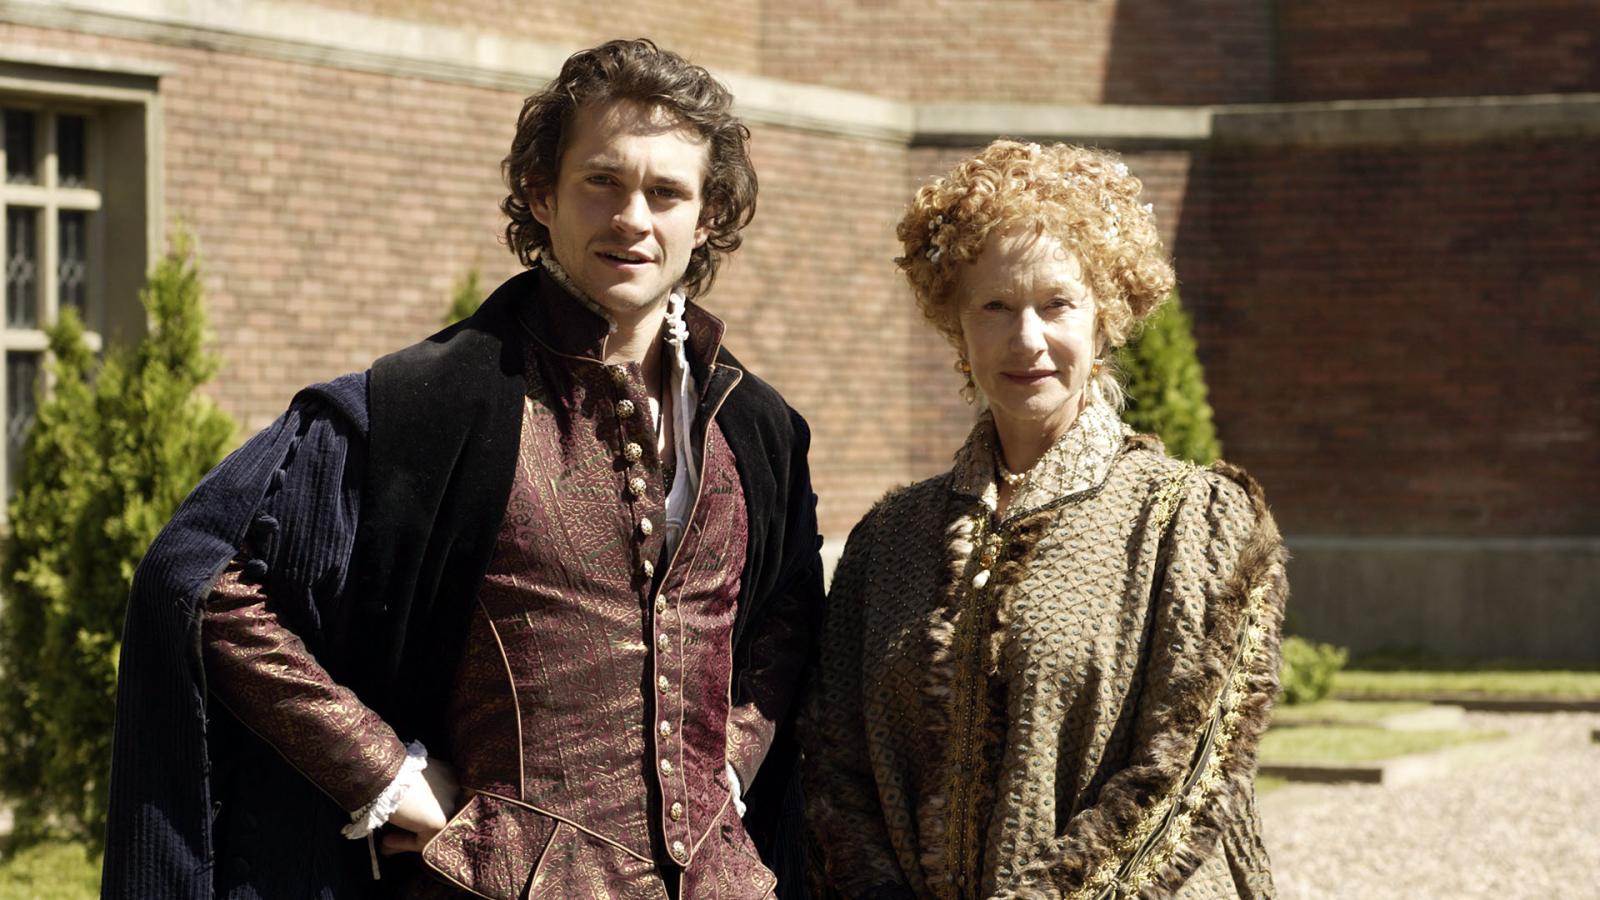 Not Just The Crown: 7 British Royal Dramas You Need to Binge-Watch Now - image 7